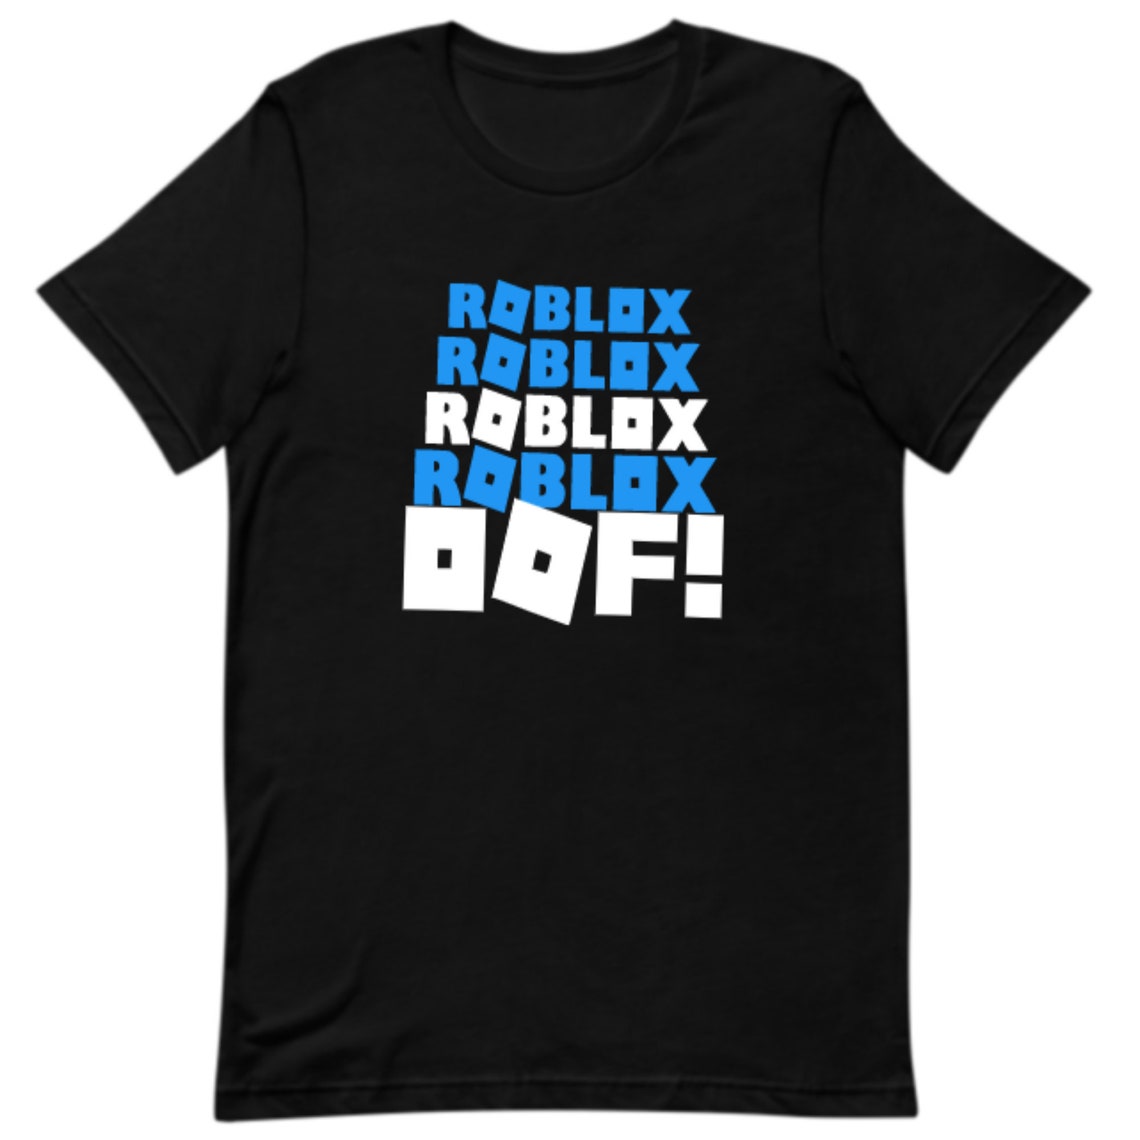 Roblox Girls Ts For Kids Kids Clothing Etsy